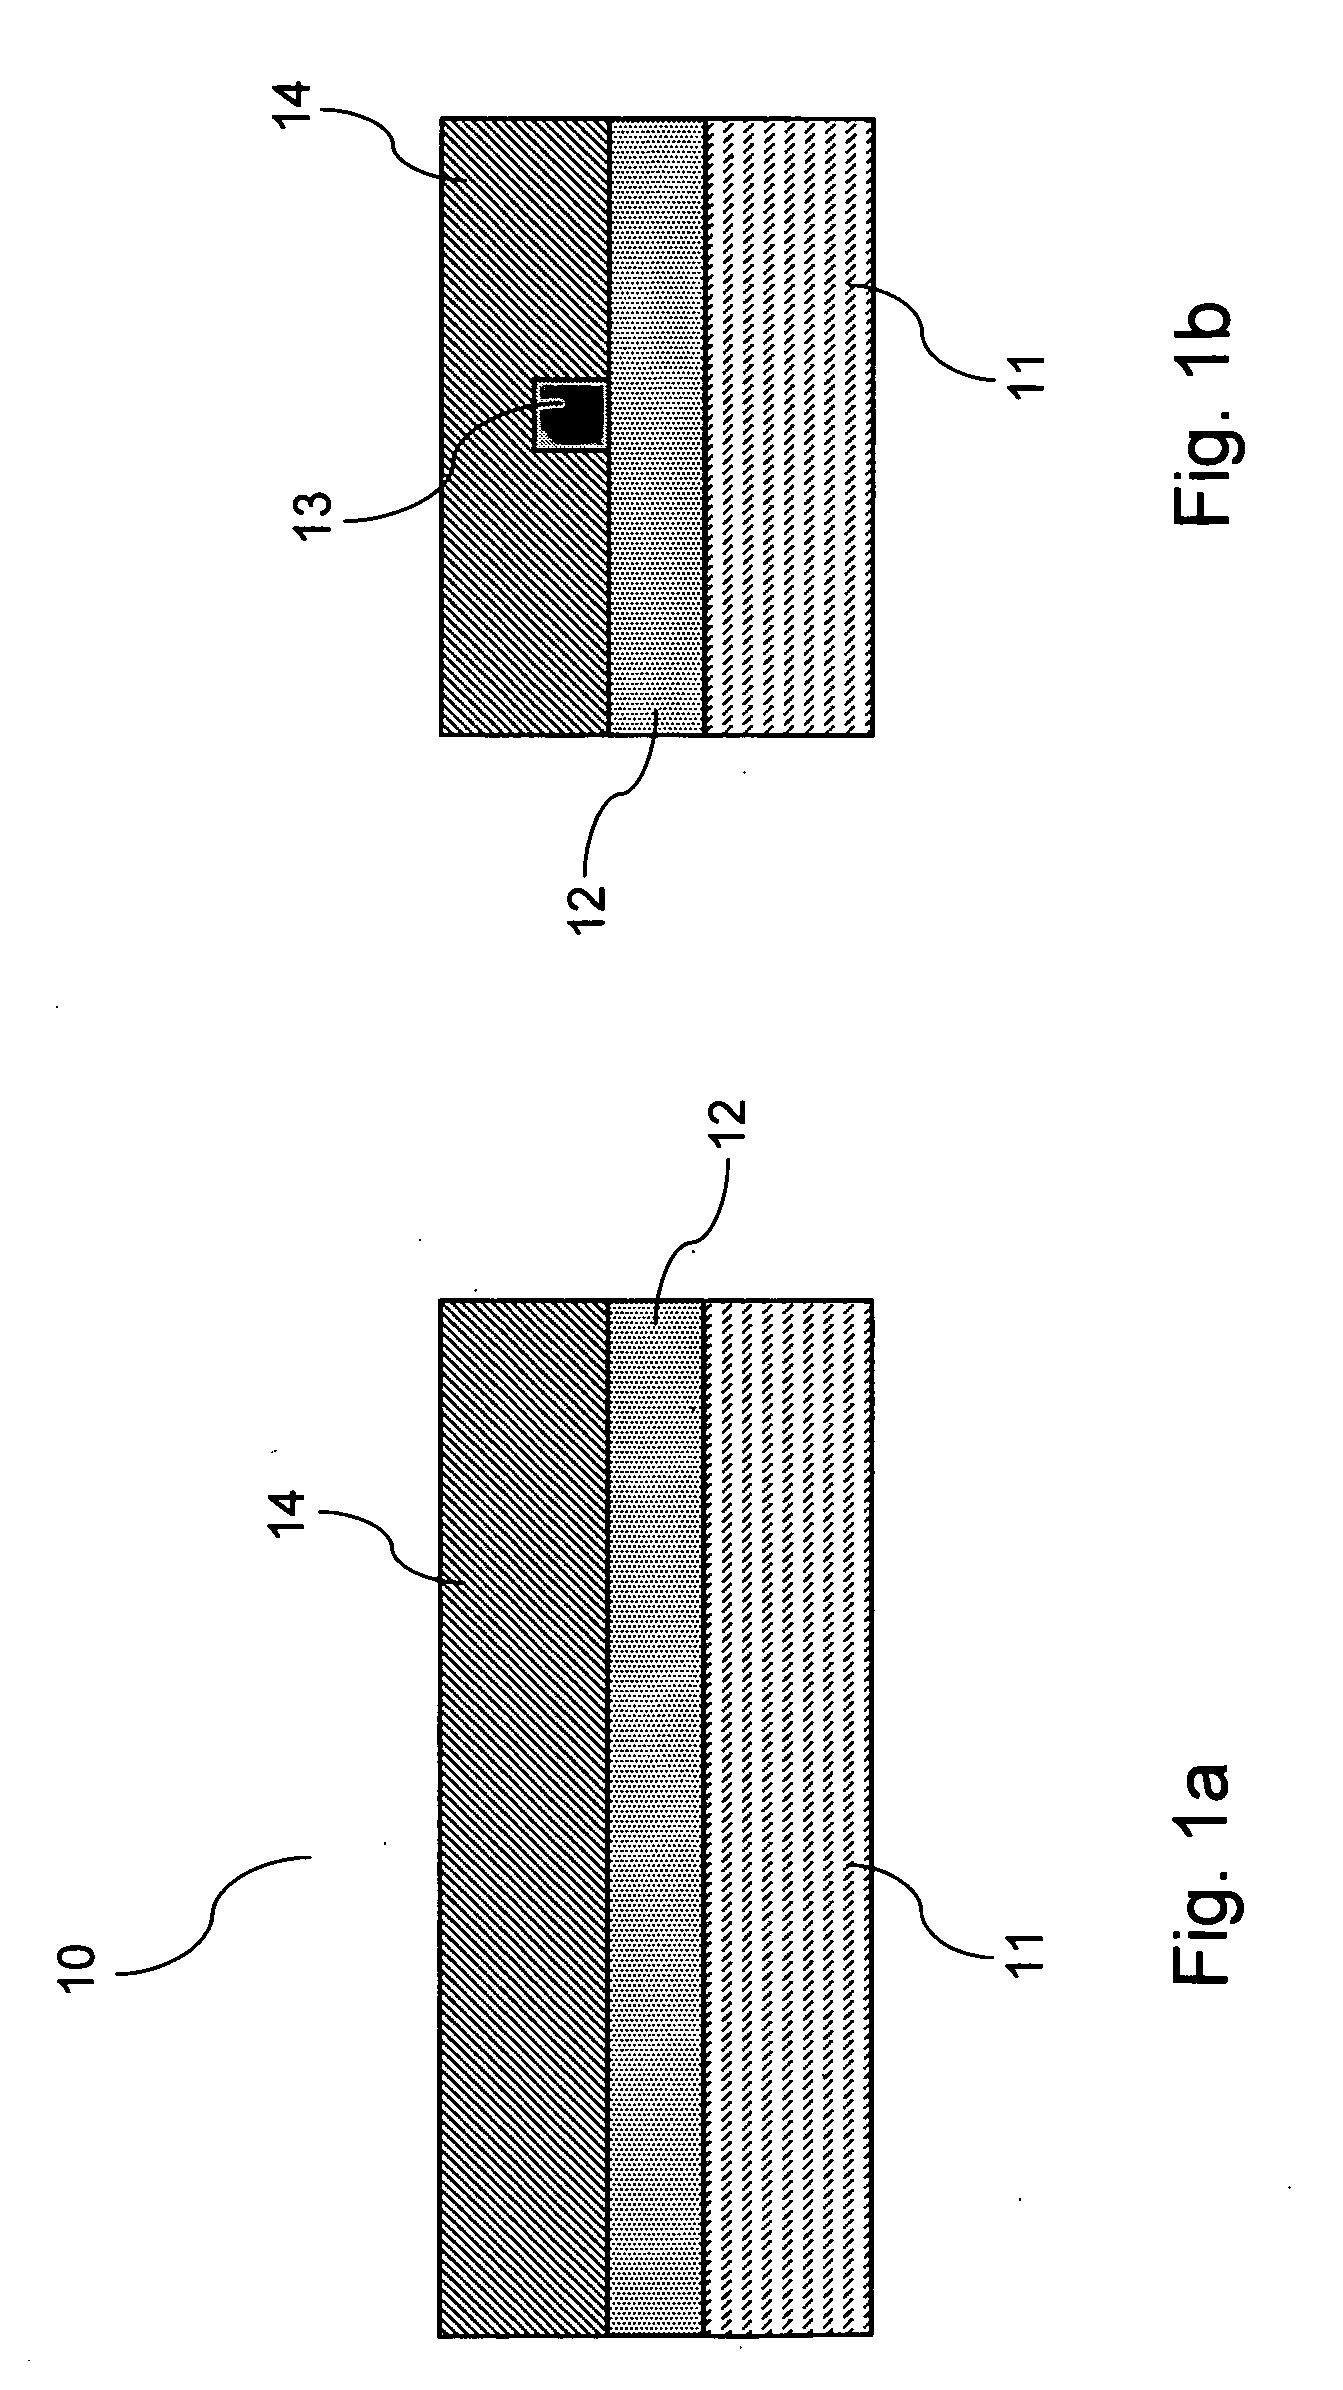 Process for producing polysiloxanes and use of the same